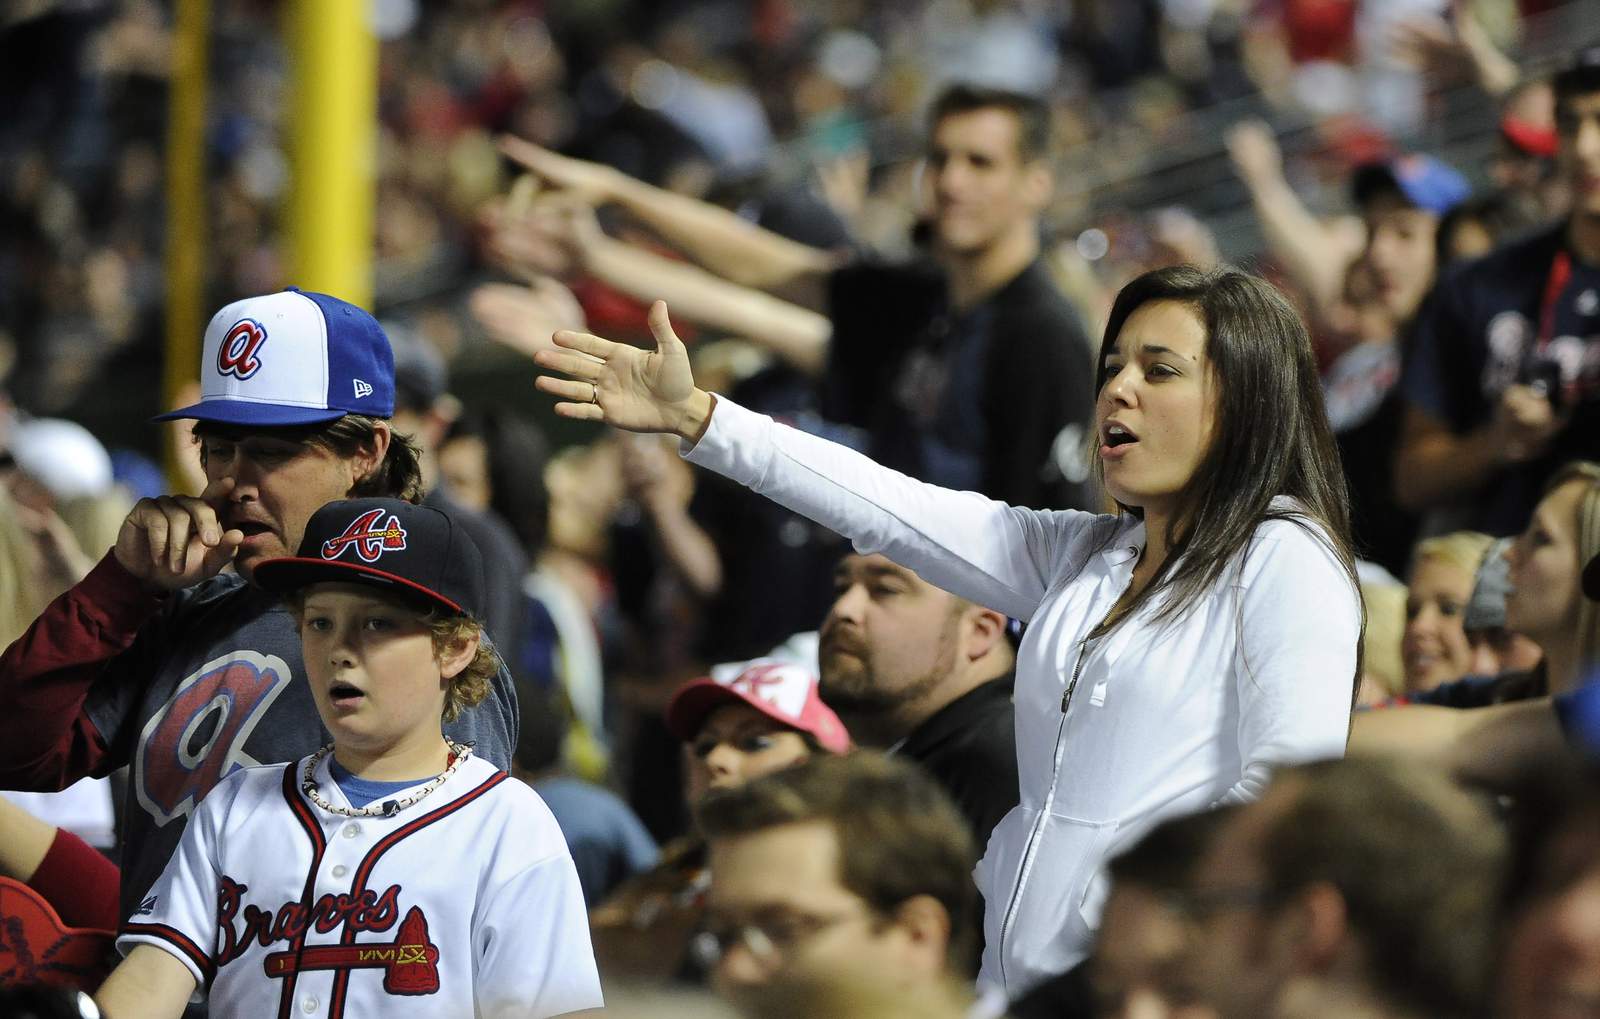 Braves remove 'Chop On' sign, slogan, but no call on chant